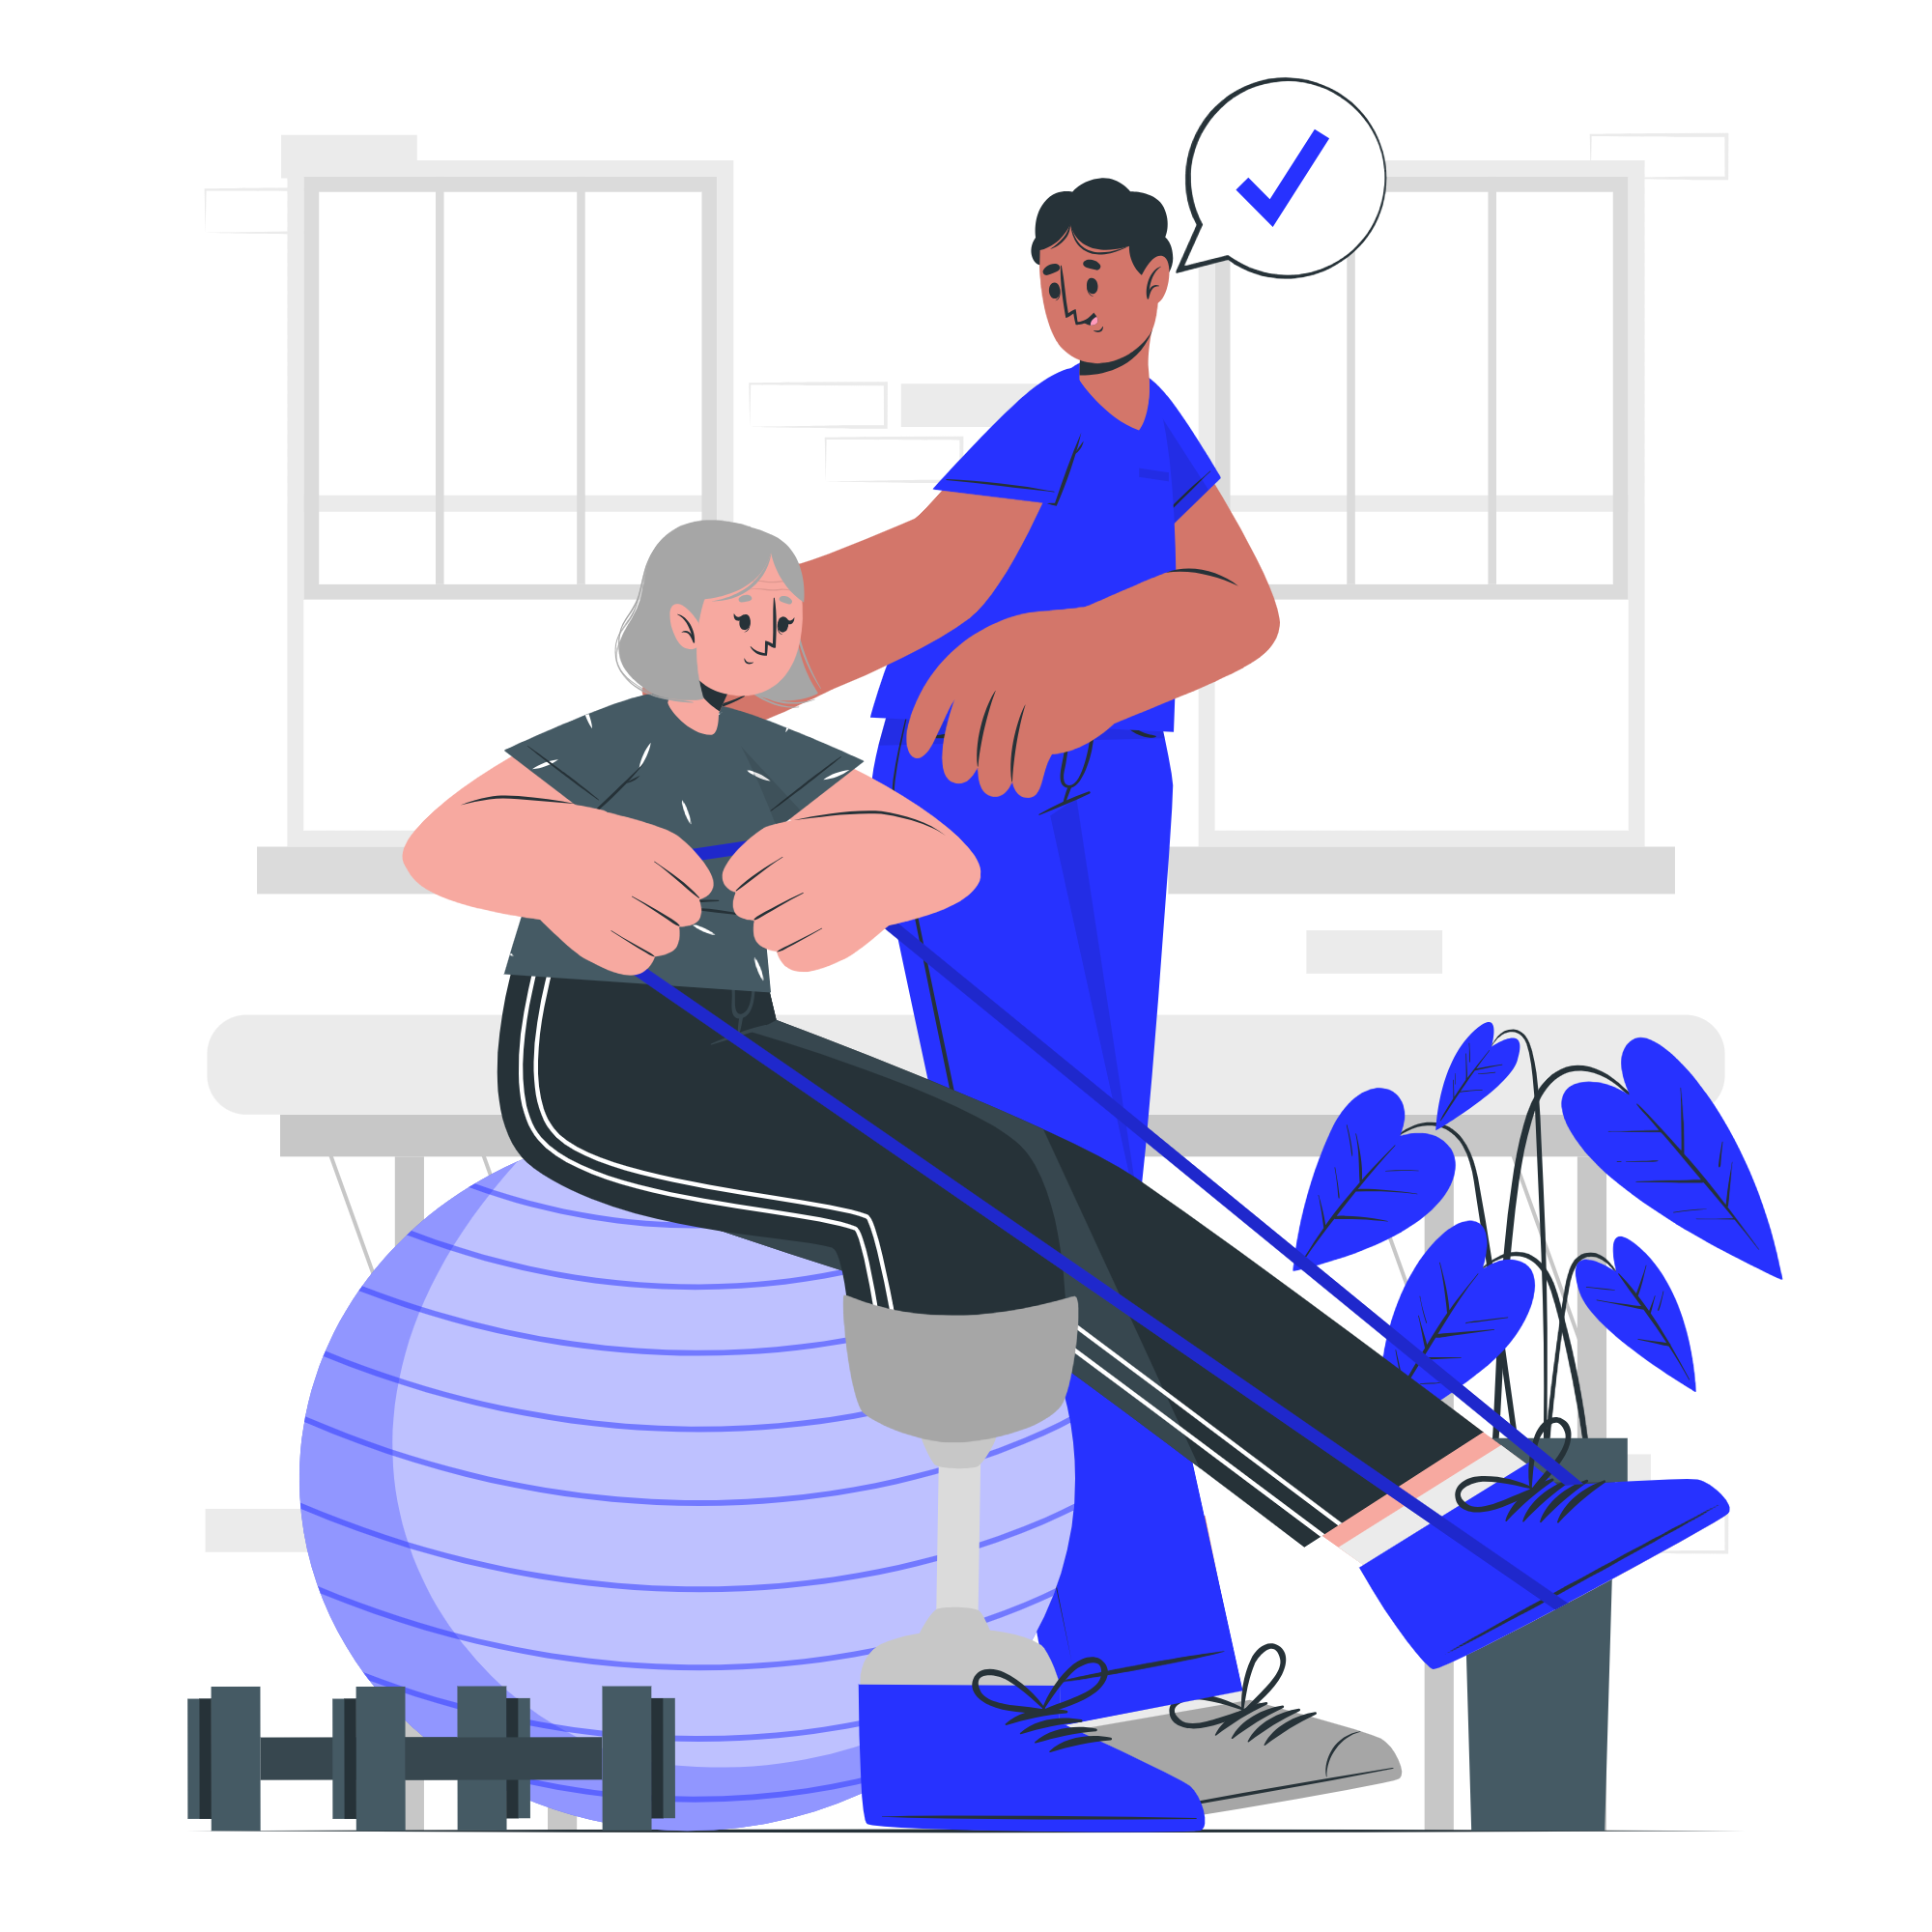 Image representing companionship services: Depicts individuals engaged in physical therapy interaction and support, fostering companionship and emotional well-being.